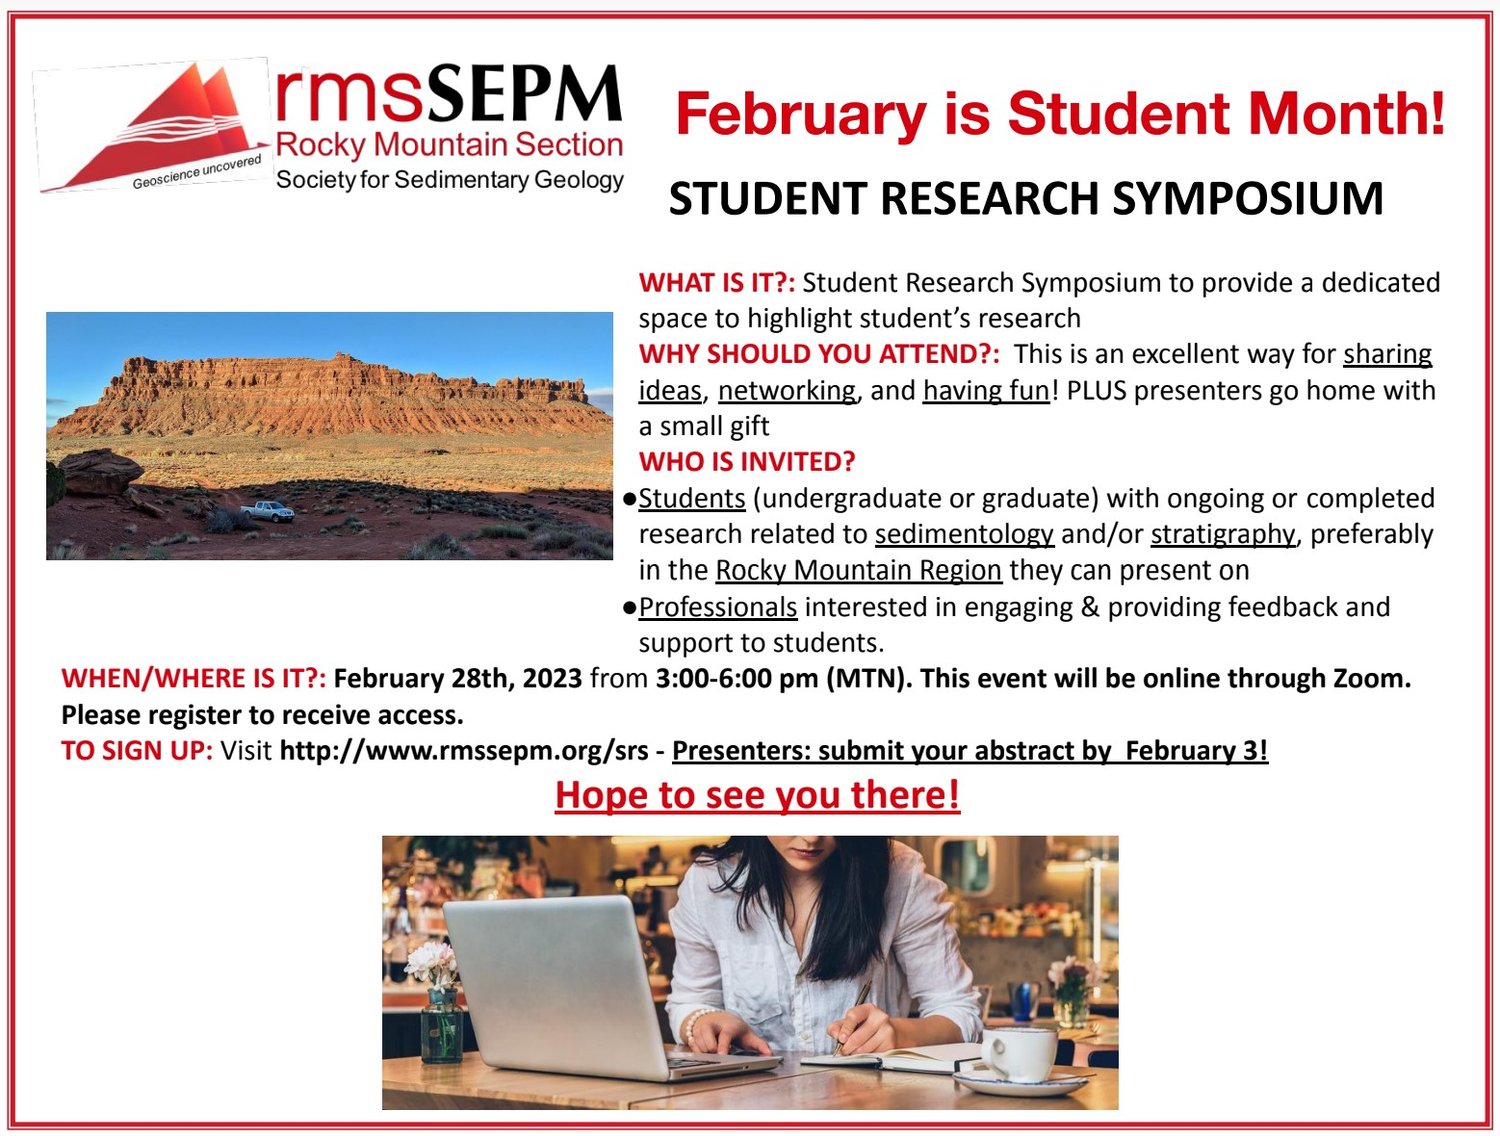 RMS SEPM Student Research Symposium